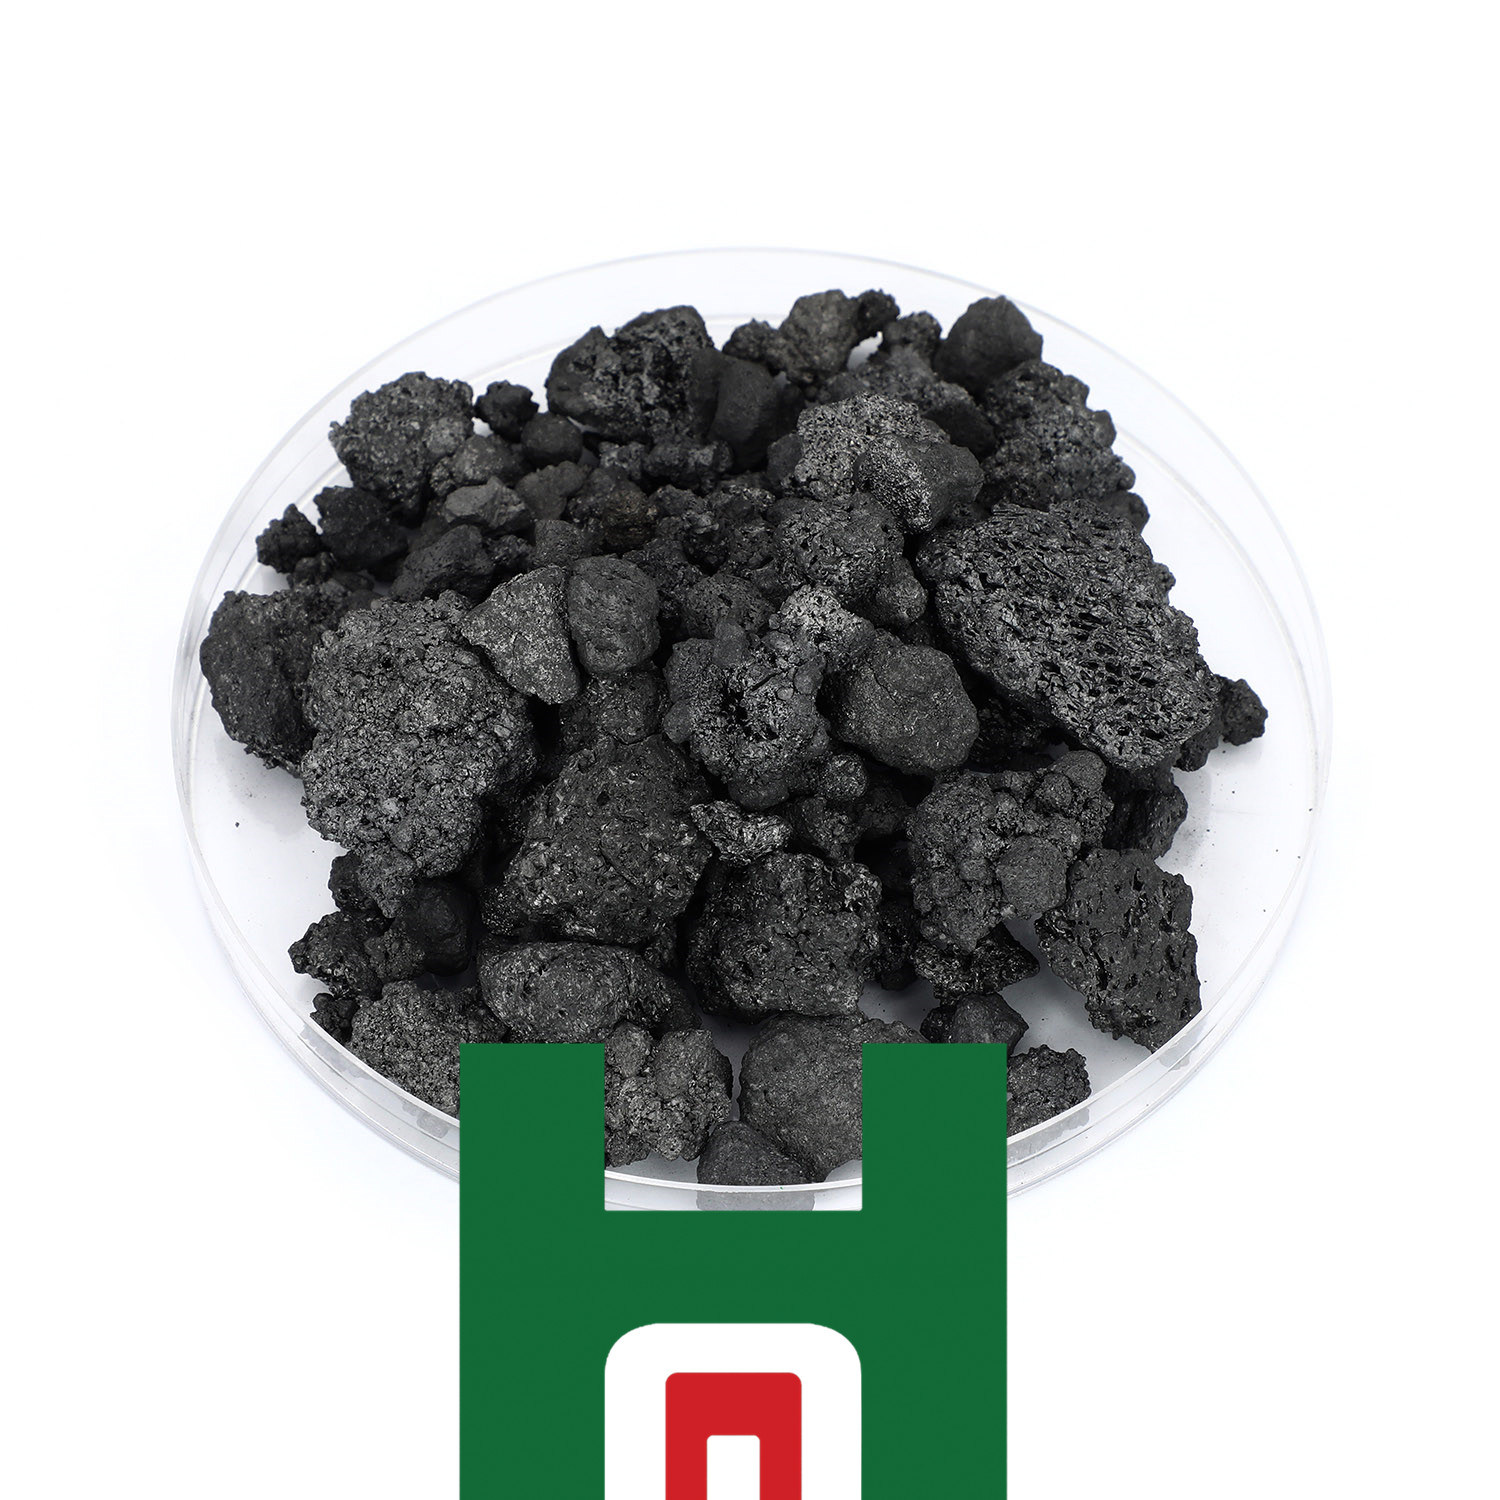 Hot Sale Silicon Carbide in Big Block Sic from direct factory